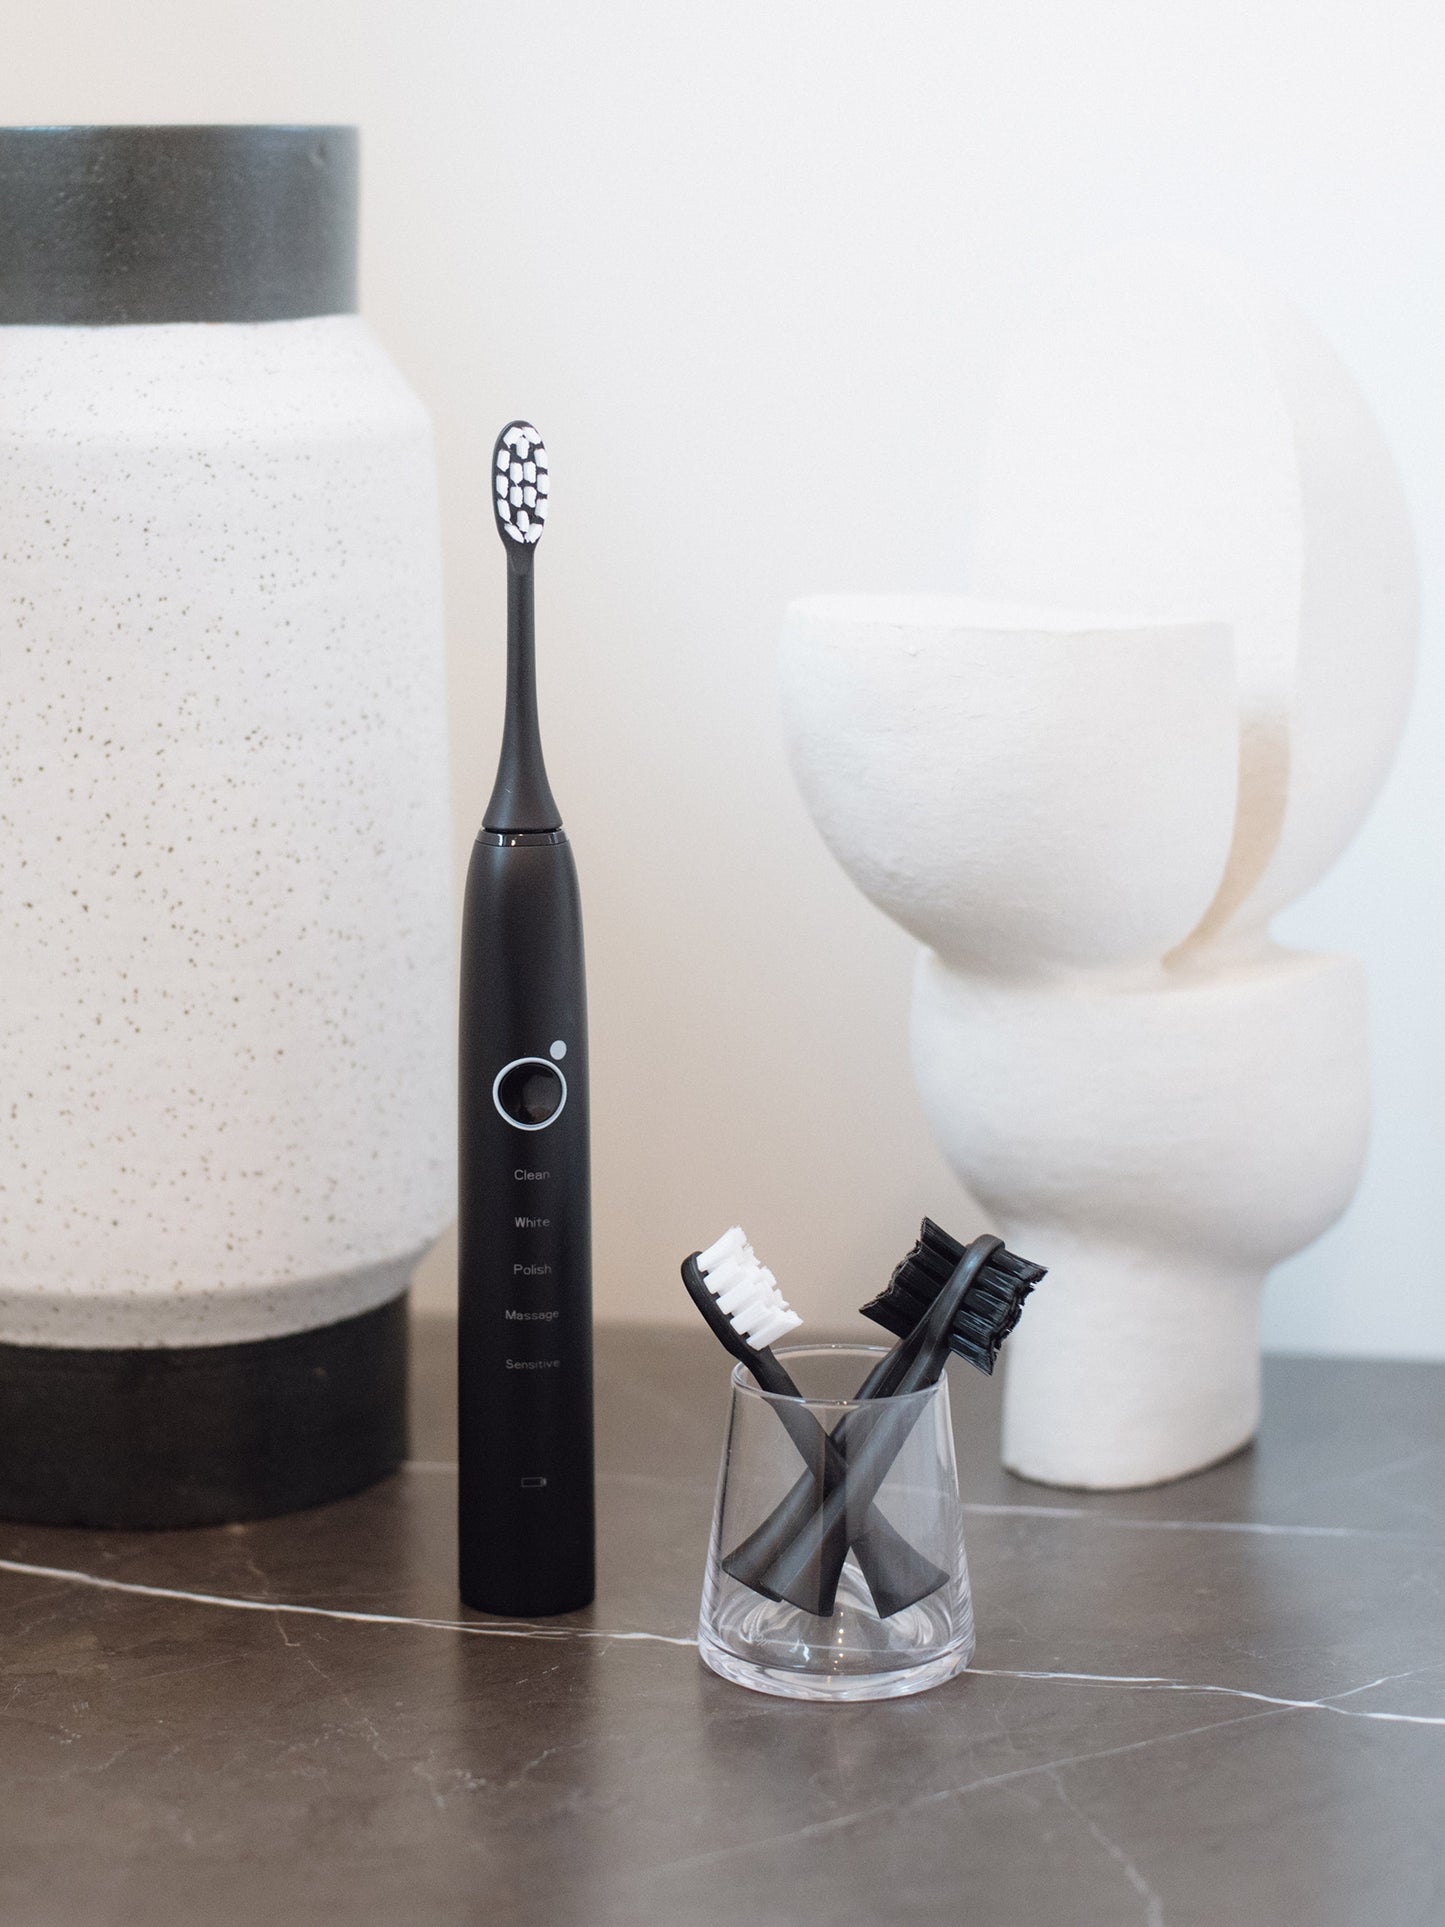 moon black toothbrush and refills